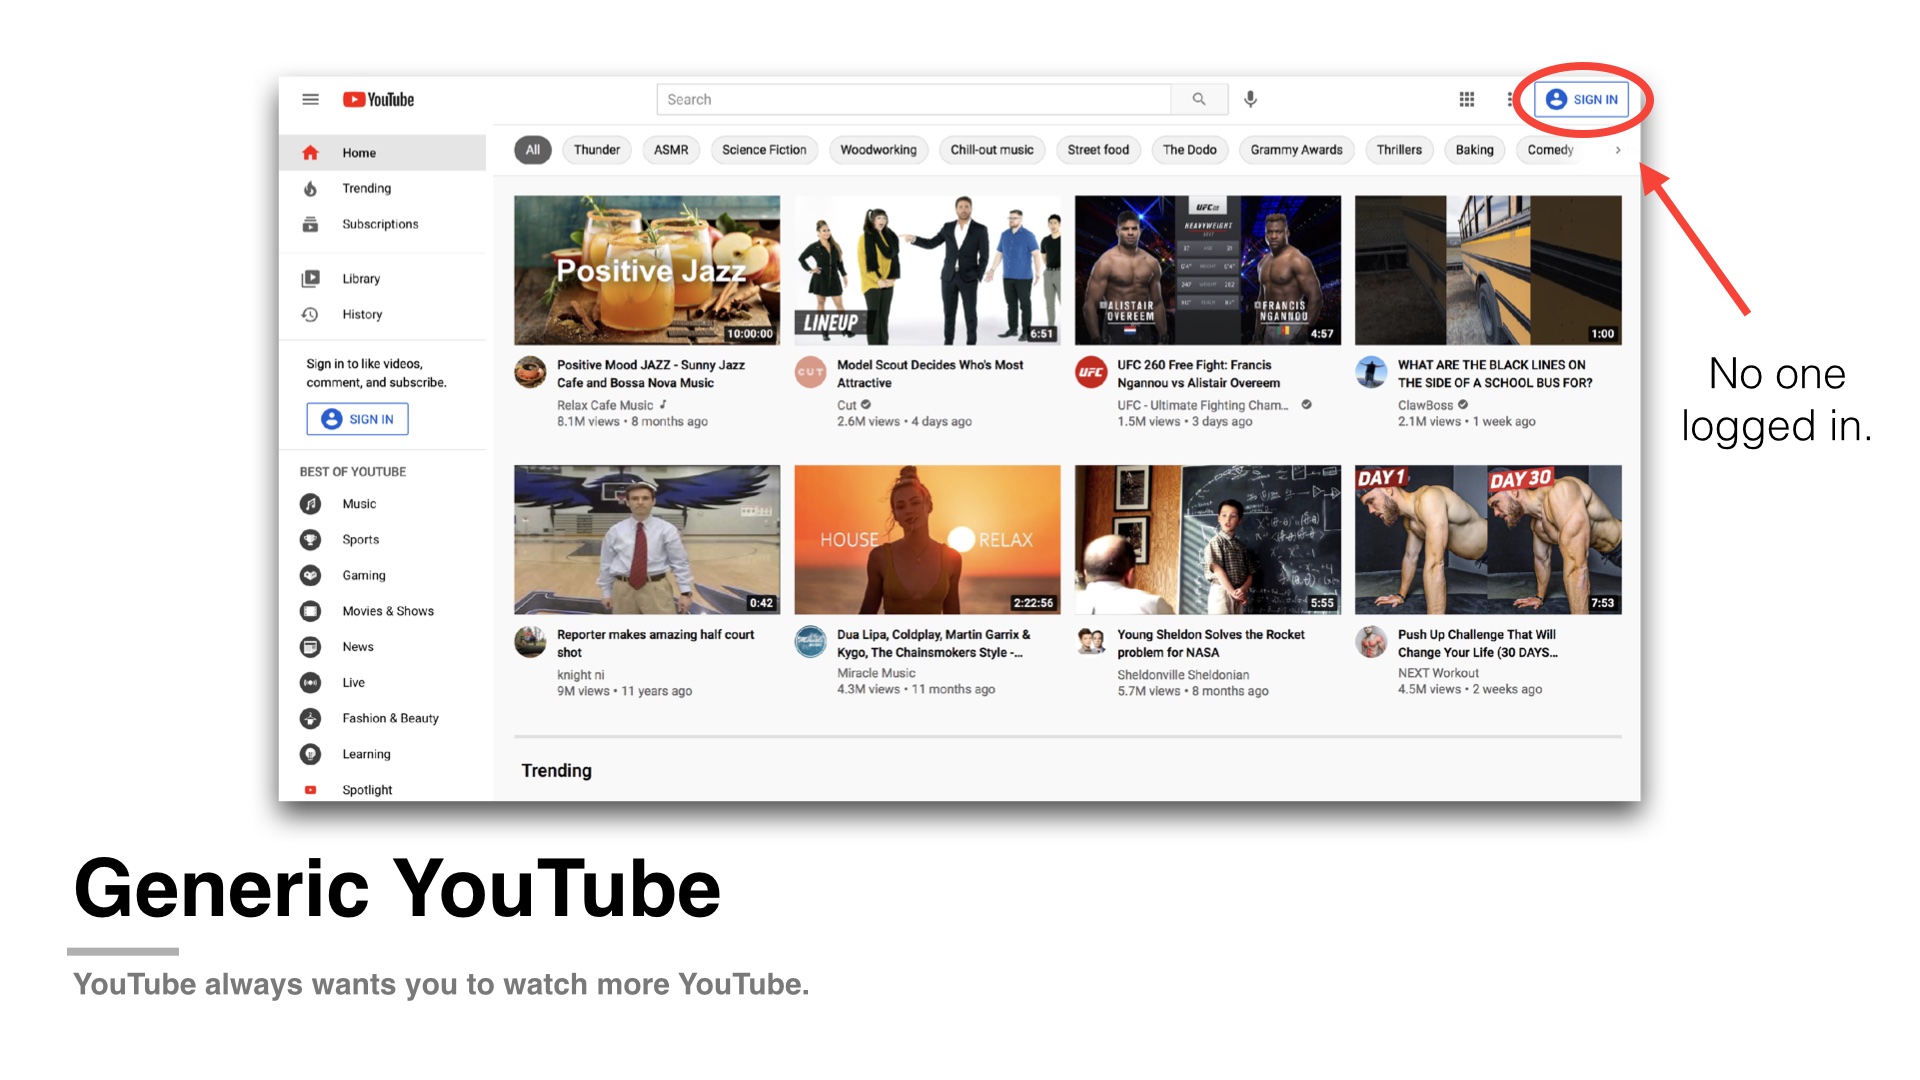 Screen shot of YouTube home page for a generic user, pointing out how you can tell no one is logged in by looking in the upper right